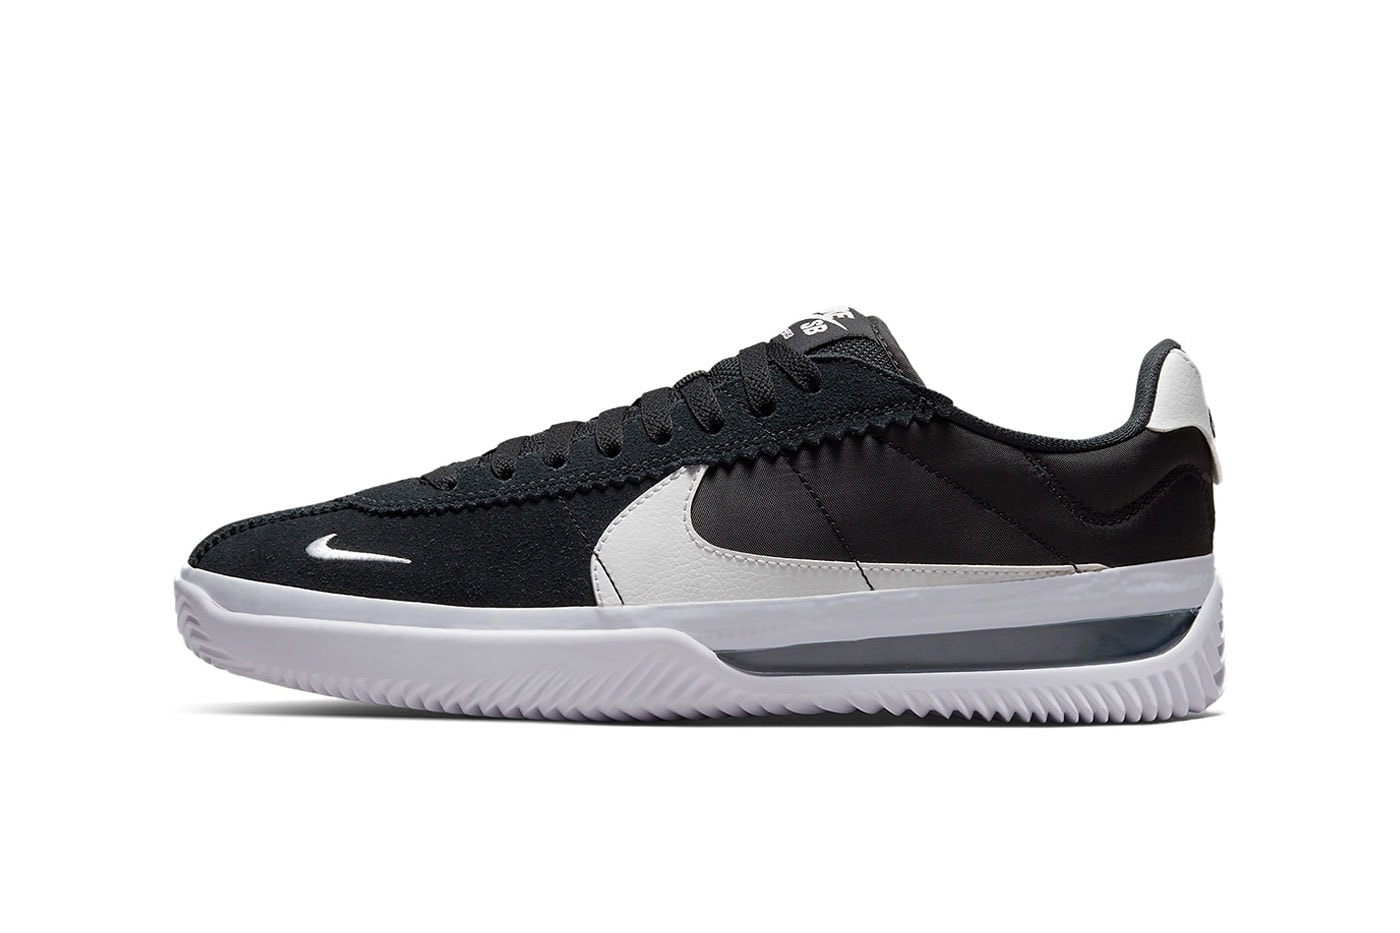 Unveiling the Ultimate Hypebeast Nike Cortez by Sierato